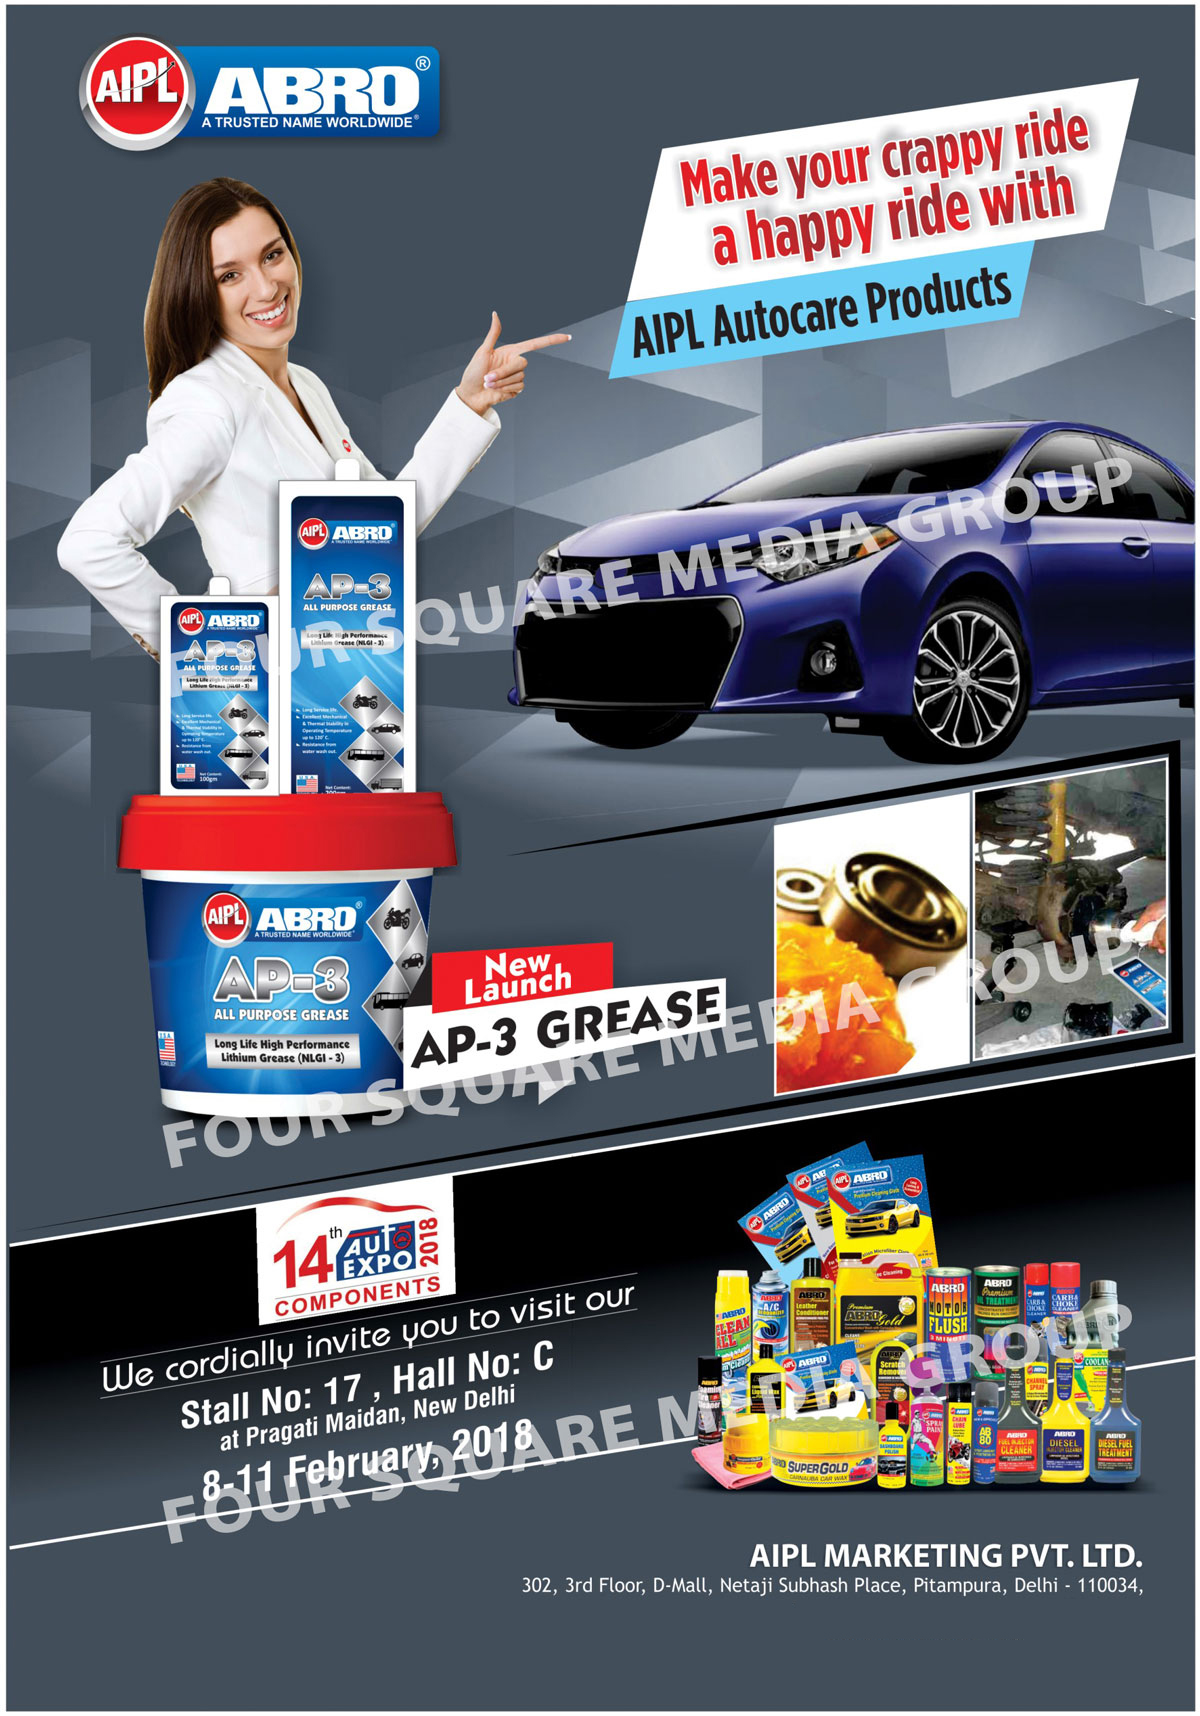 Autocare Products, Auto Care Products, Wheel Cleaners, Diesel Fuel Treatment, Automotive Liquid Wax, Scratch Cleaner, Car Care Products, Fuel Injector Cleaners, Foaming Tire Cleaners, Dashboard Polishes, Diesel Injector Cleaners, Car Wax, Oil Treatments, Construction Chemicals, Waterproofing Products, Crack Fillers, Waterproofing Masters, Grinding Wheels, Cut off Wheels, Abrasive Products, Premium Tapes, Spray Paints, Silicone Sealants,Air Freshener, DCD Wheels, Liquid Wax, Motor Flush, Scratch Remover, Wash N Glo, Cut Off Wheel, Cloth Roll, Aluminum Fiber Discs, Radiator Coolant, Engine Coolant, Motor Oil, Shock Master, Motorcycle Oil, Gear Lube, Motor Oil, Two Wheeler Batteries, Insulation Tape, Mirror Mounting Tape, Structure Glazing Tape, Duct Tape, Aluminium Tape, Maskting Tape, PTEF Thread Sealing Tapes, General Purpose Silicone Sealant, Premium Gold Car Wash, Windshield Cleaner, Anti-Freeze Concentrate, Silicon Cleaner, Siliconized Tire Shine, Radiator Flush, Diesel  Fuel Injector Cleaner, Power Steering Fluid, Chain Lube, Gasket Remover, Engine Oil Stop Leak, Octane Booster, Smoke Stop, Dashboard Polices